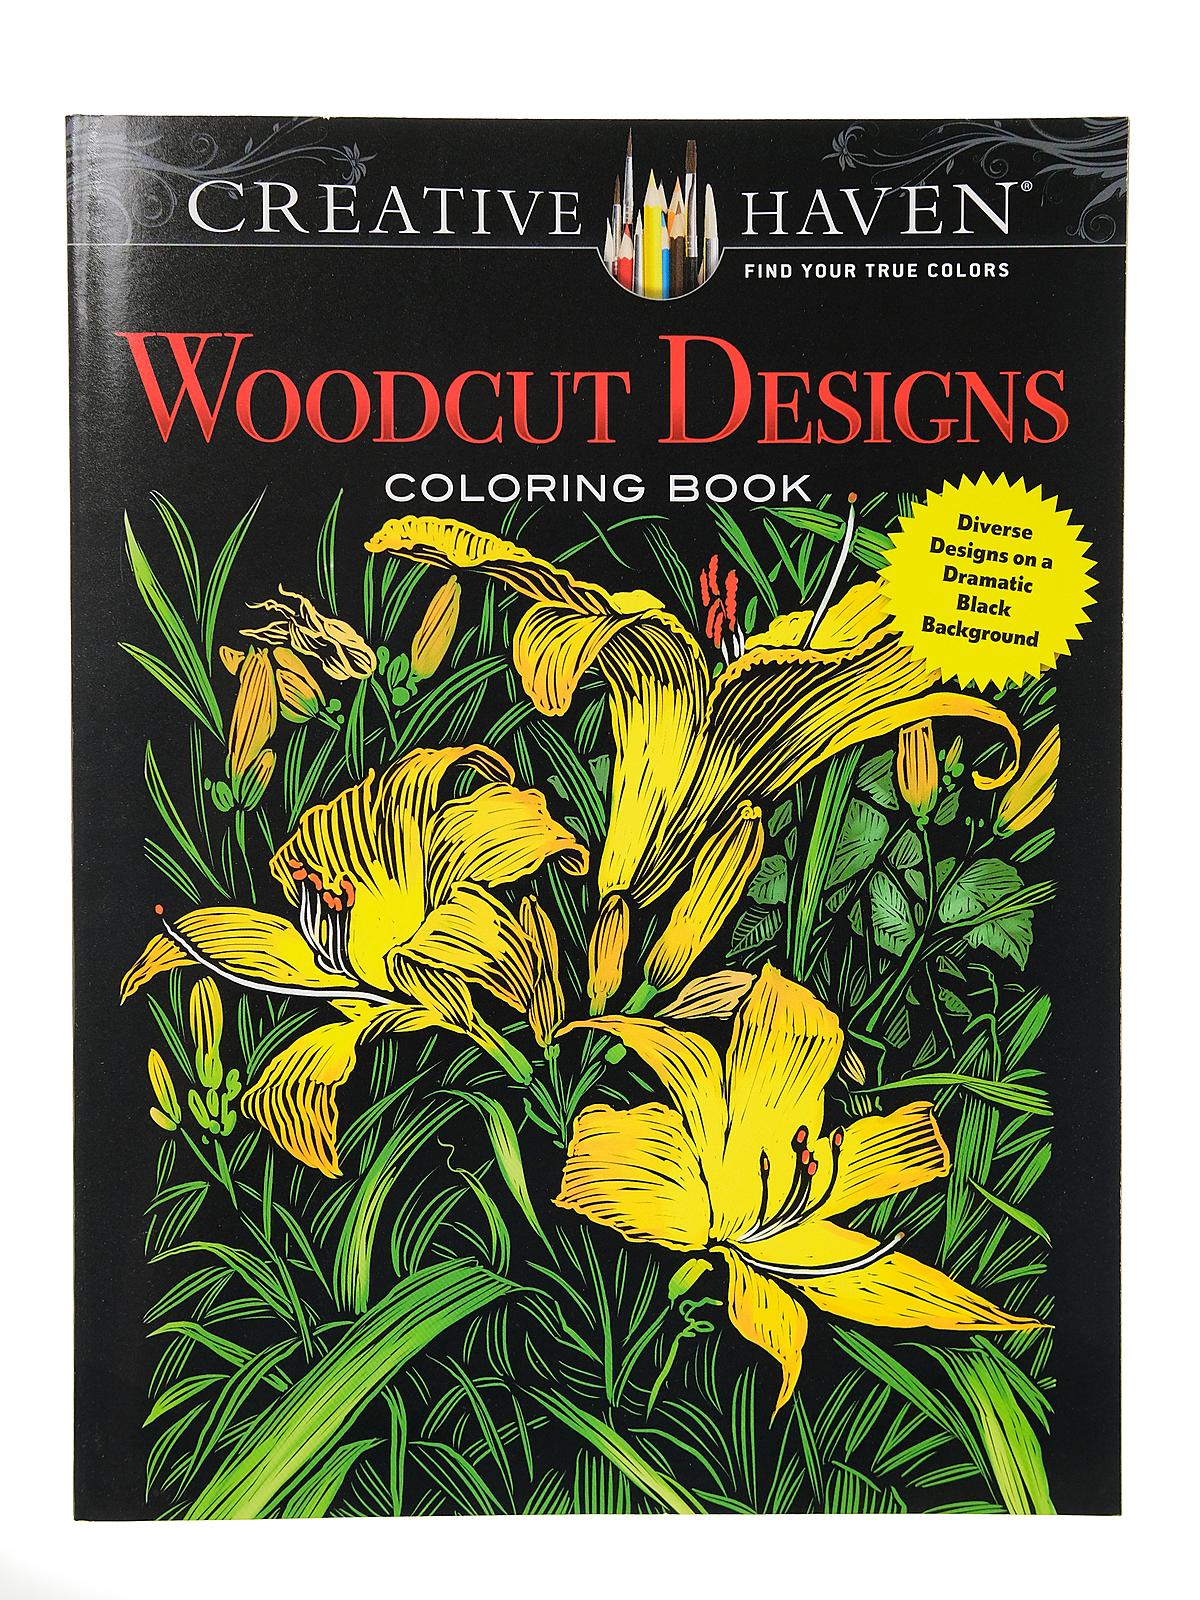 Creative Haven Dramatic Black Background Coloring Books Woodcut Designs